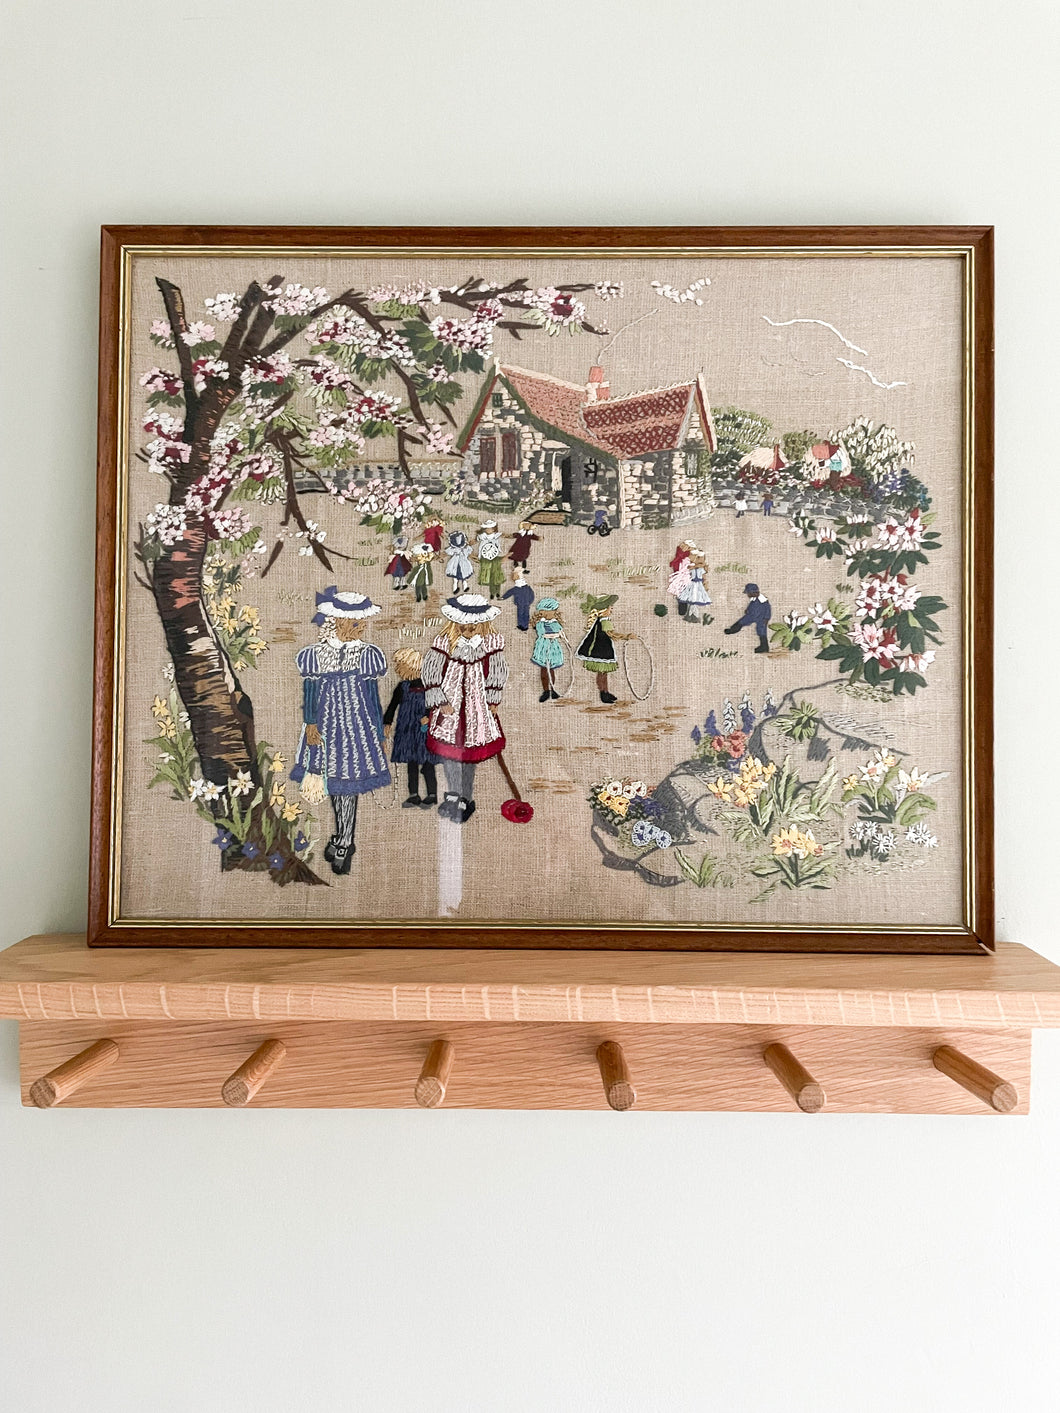 Vintage framed embroidery children playing in a school playground with blossom and spring flowers - Moppet